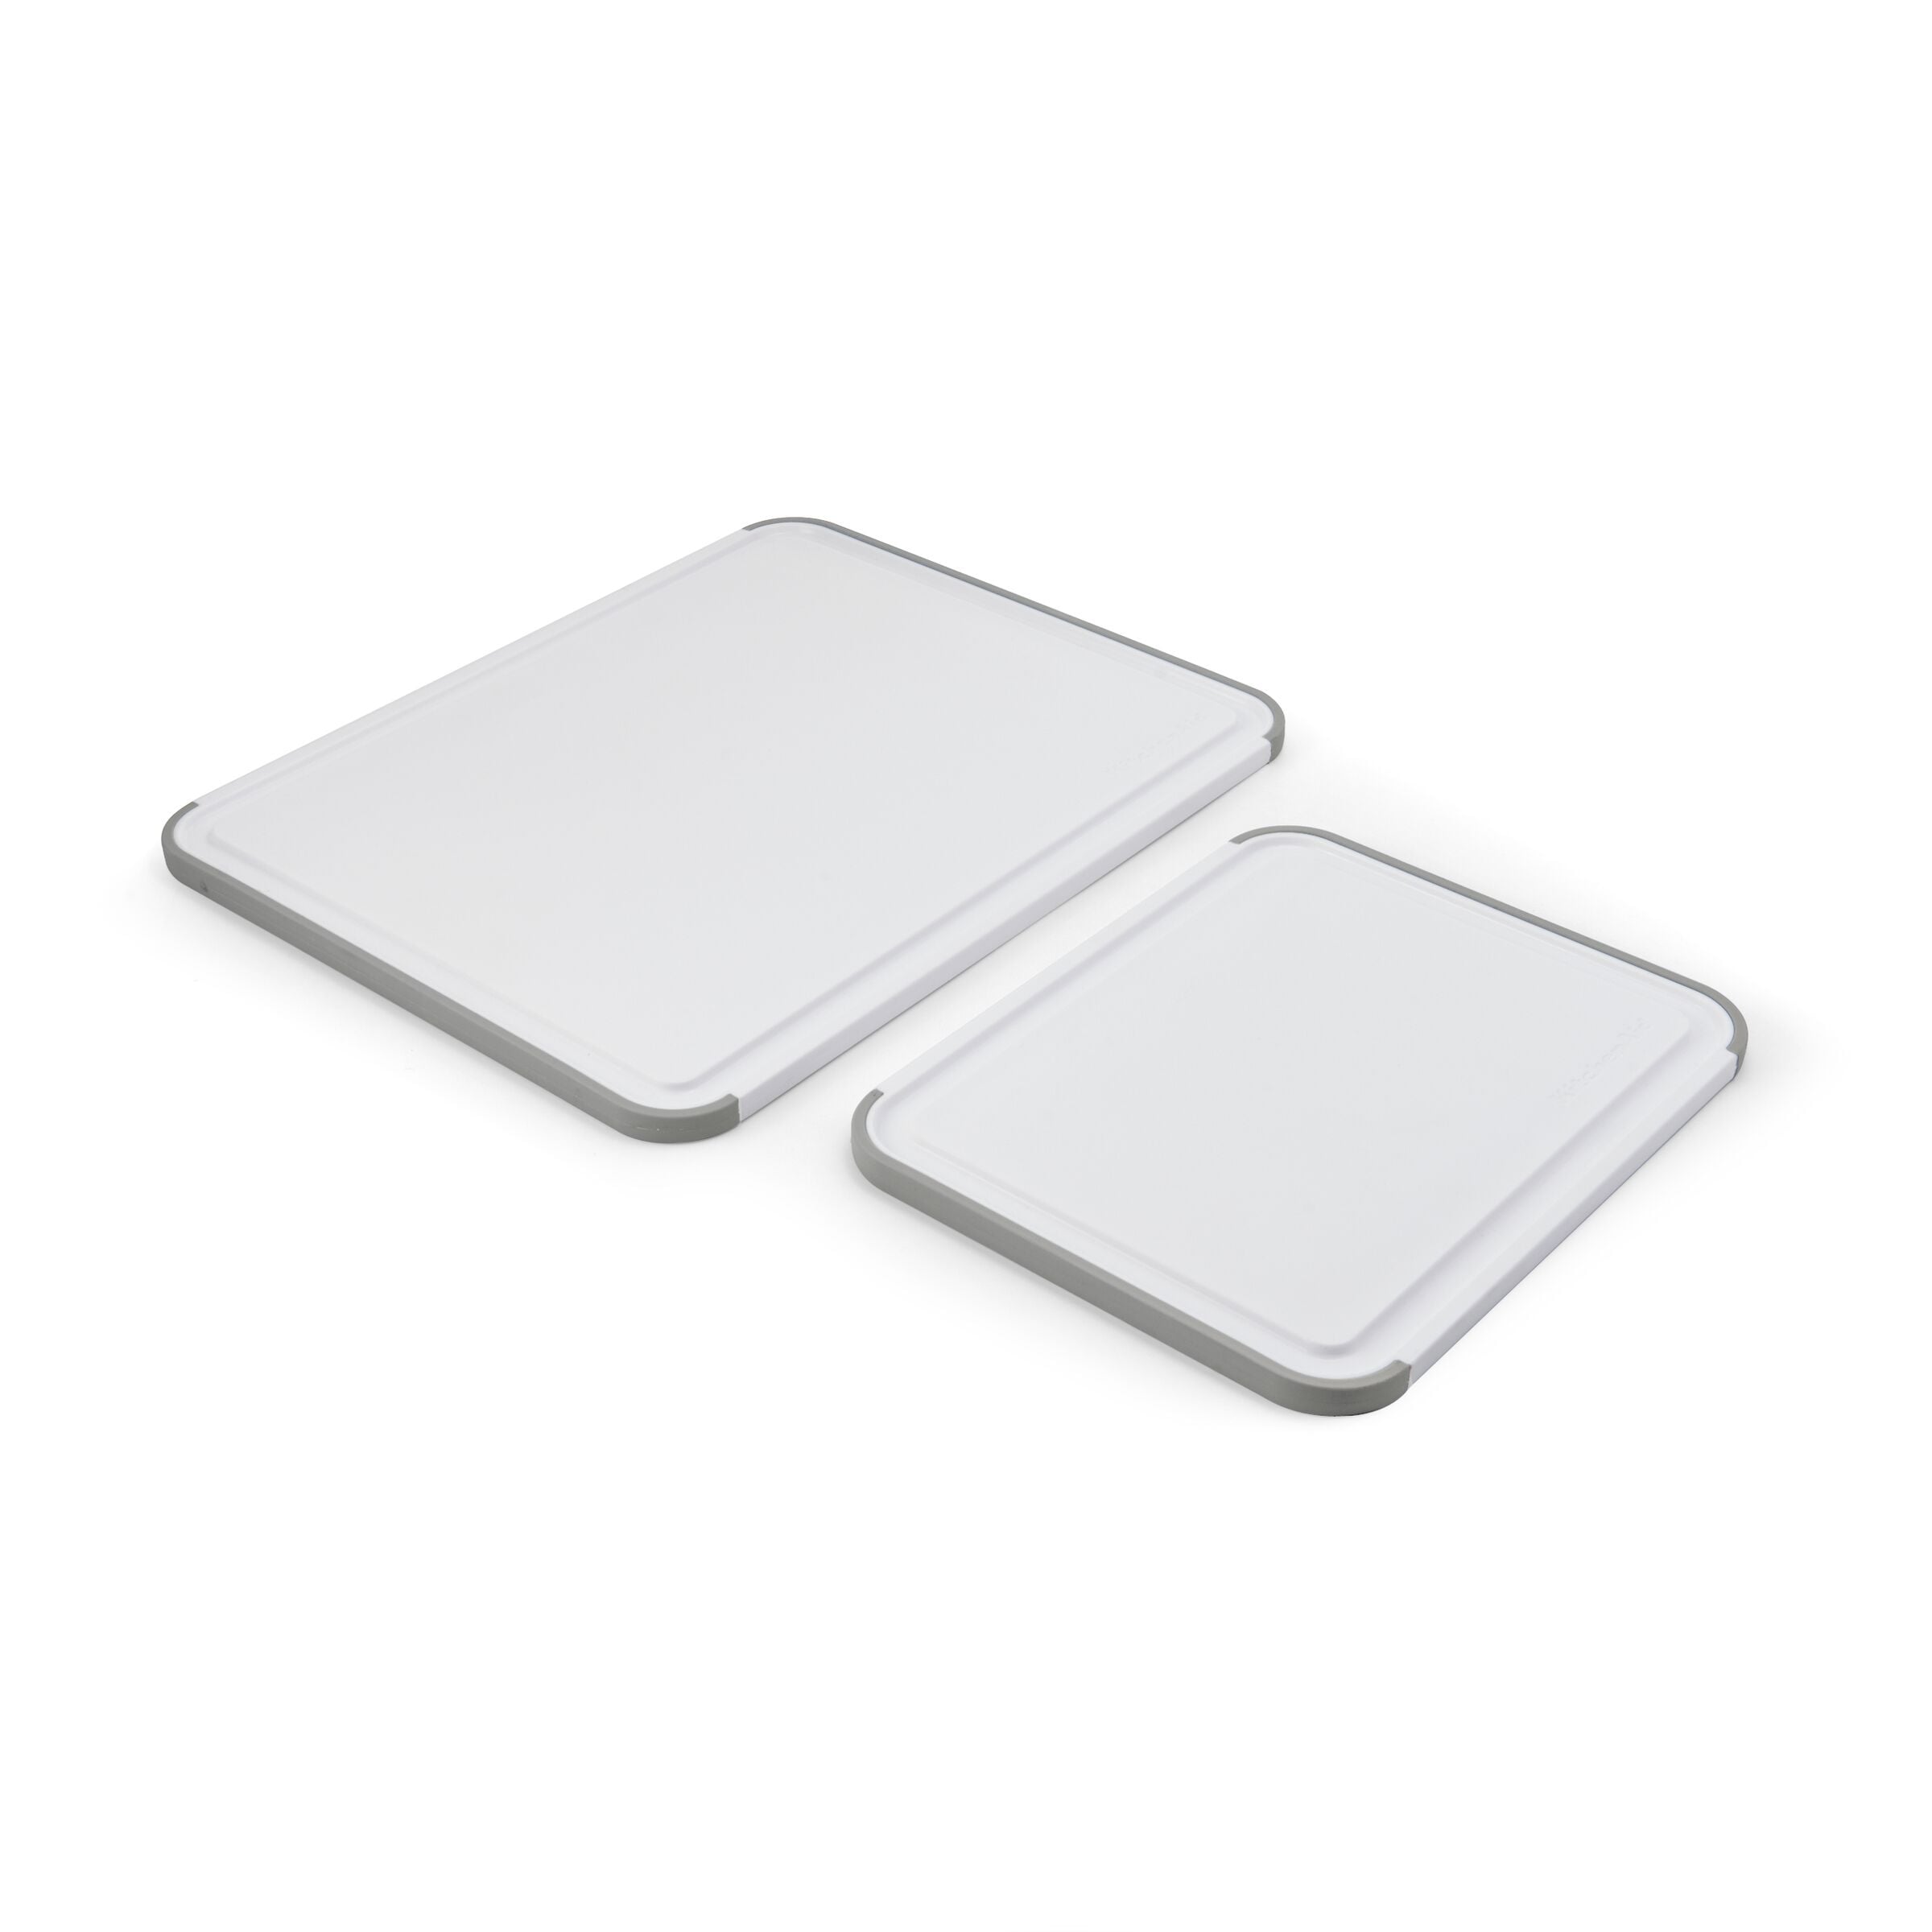 https://ak1.ostkcdn.com/images/products/is/images/direct/8c2a1859502746f7aab34cfb542b289b89391d29/KitchenAid-Classic-2-Piece-Plastic-Cutting-Board%2C-Set-of-2%2C-White.jpg